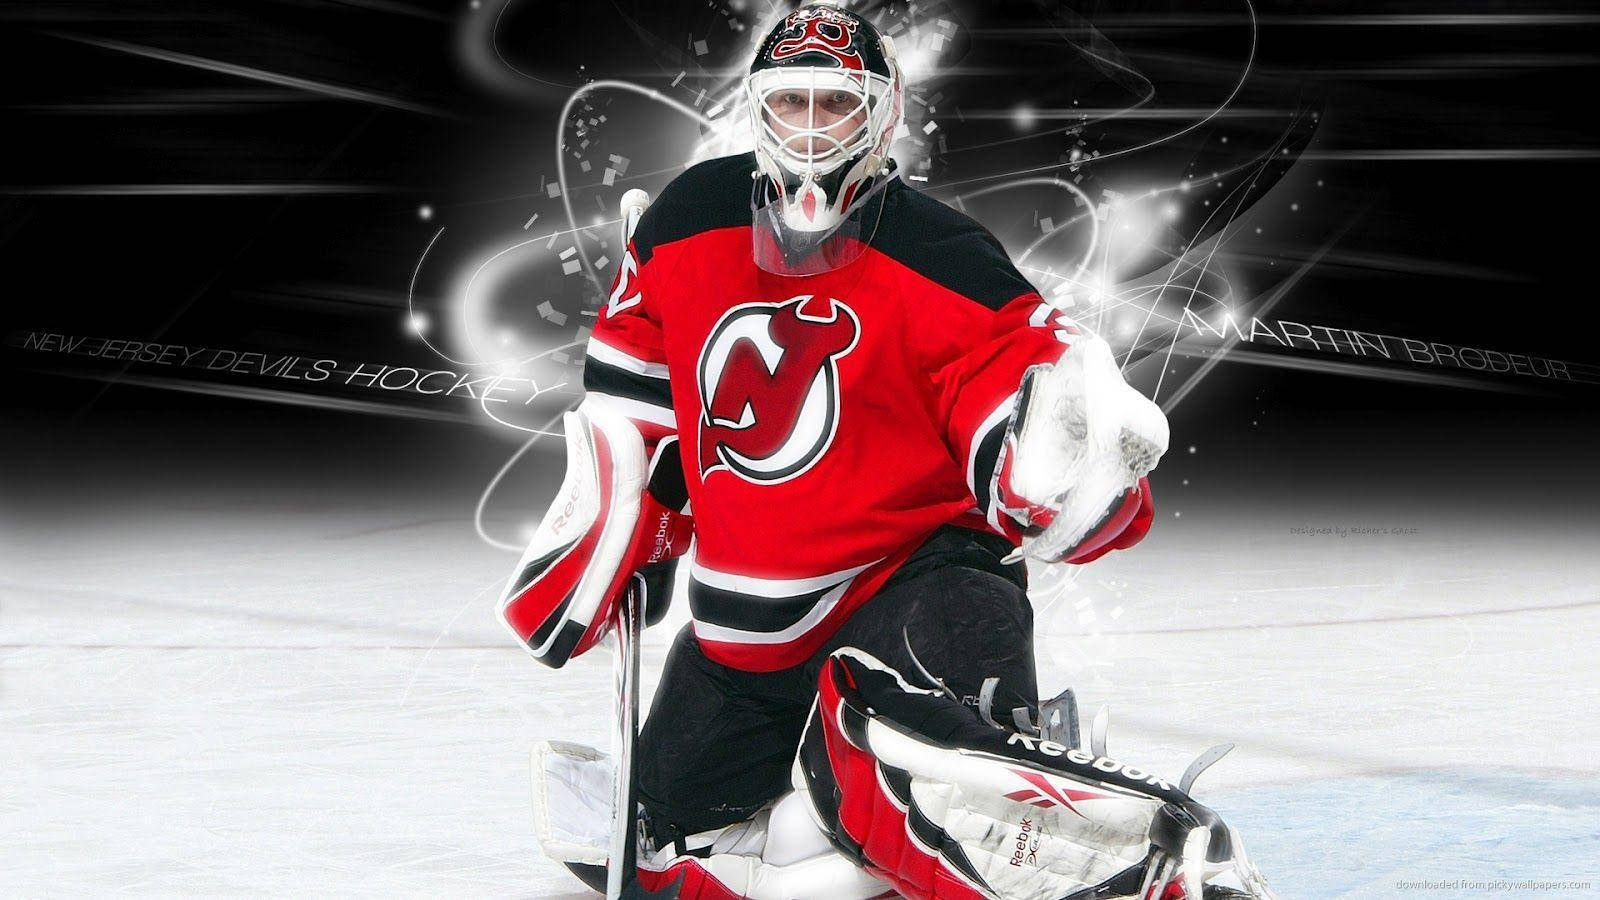 Legendary Goalkeeper Martin Brodeur Of The New Jersey Devils In Action Background